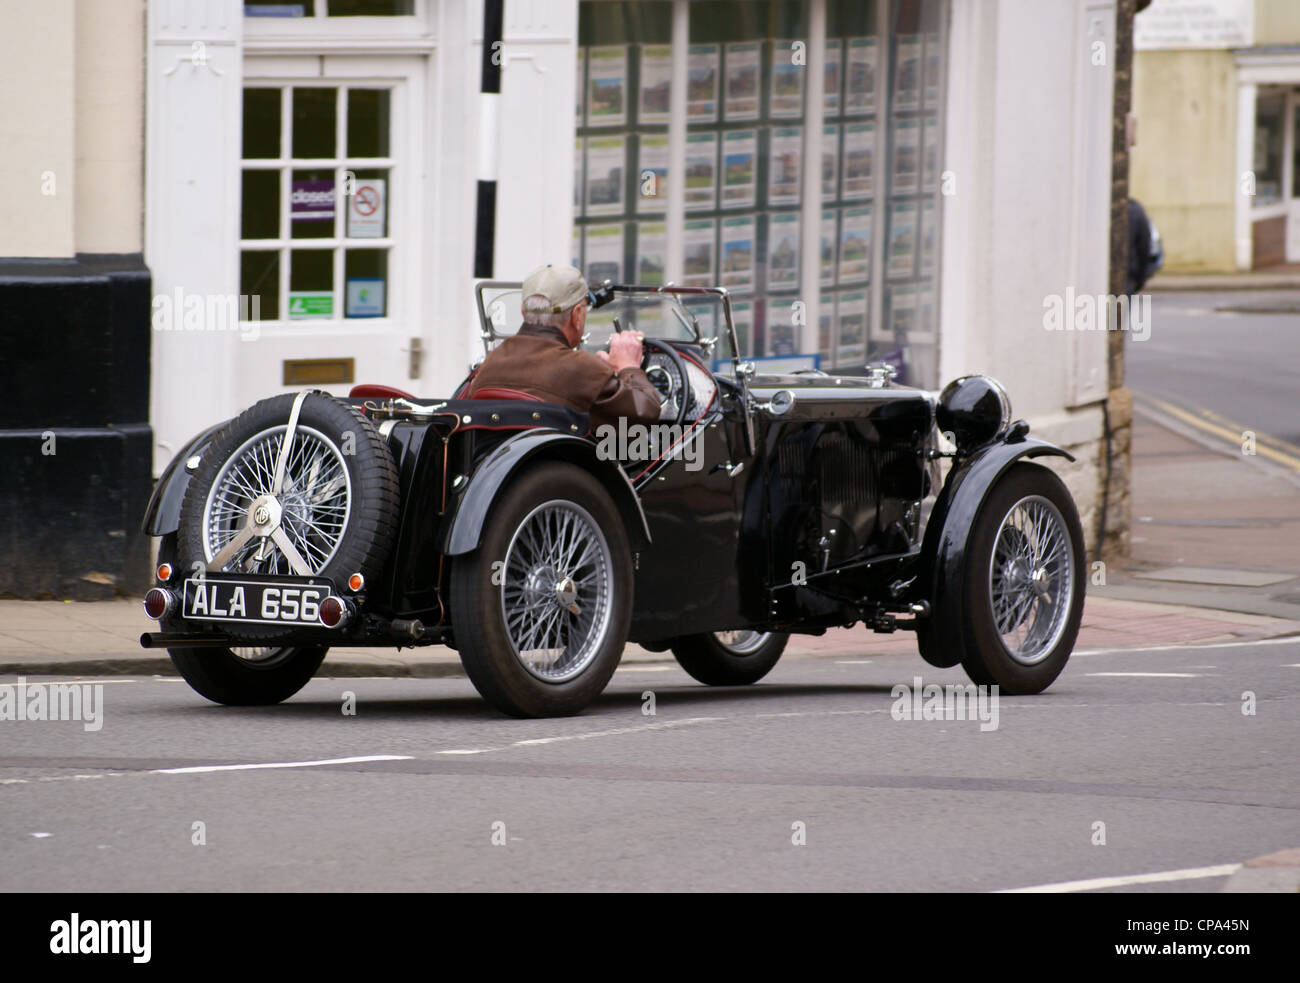 MG L2 2-door roadster sports car with cycle wings, 1086cc engine, built May 1933, being driven in Buckingham, England Stock Photo